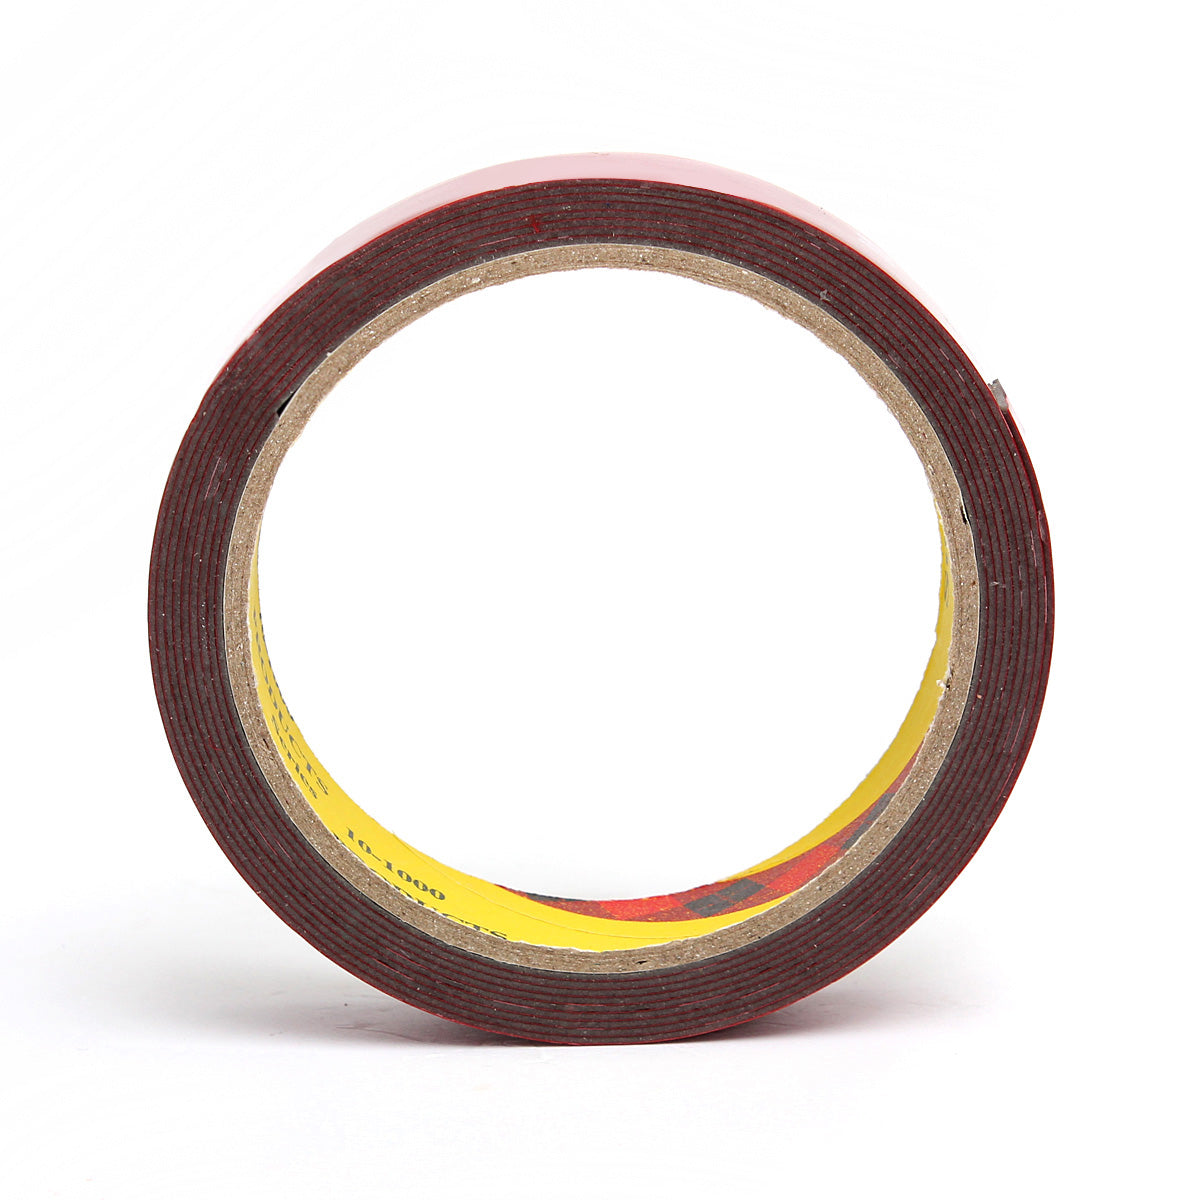 Light Goldenrod 3M Double Sided Adhesive Tape Super Sticky Acrylic Foam Sticker for Car Auto Interior Fixed